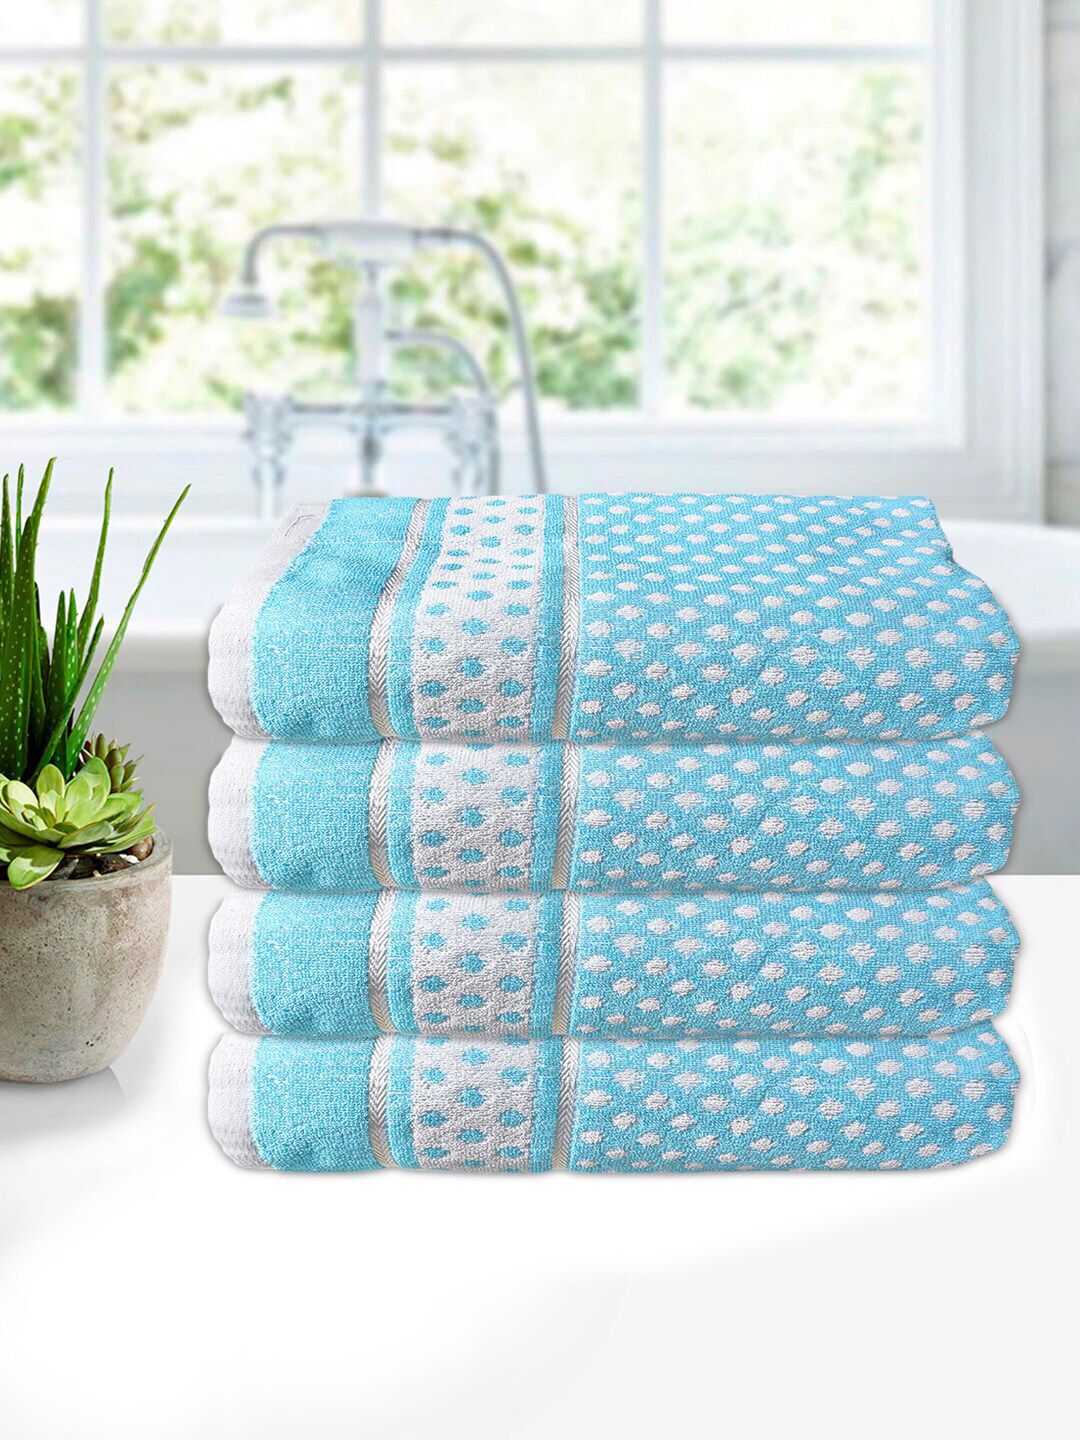 Kuber Industries Set Of 4 Blue & White Printed 400GSM Pure Cotton Bath Towels Price in India